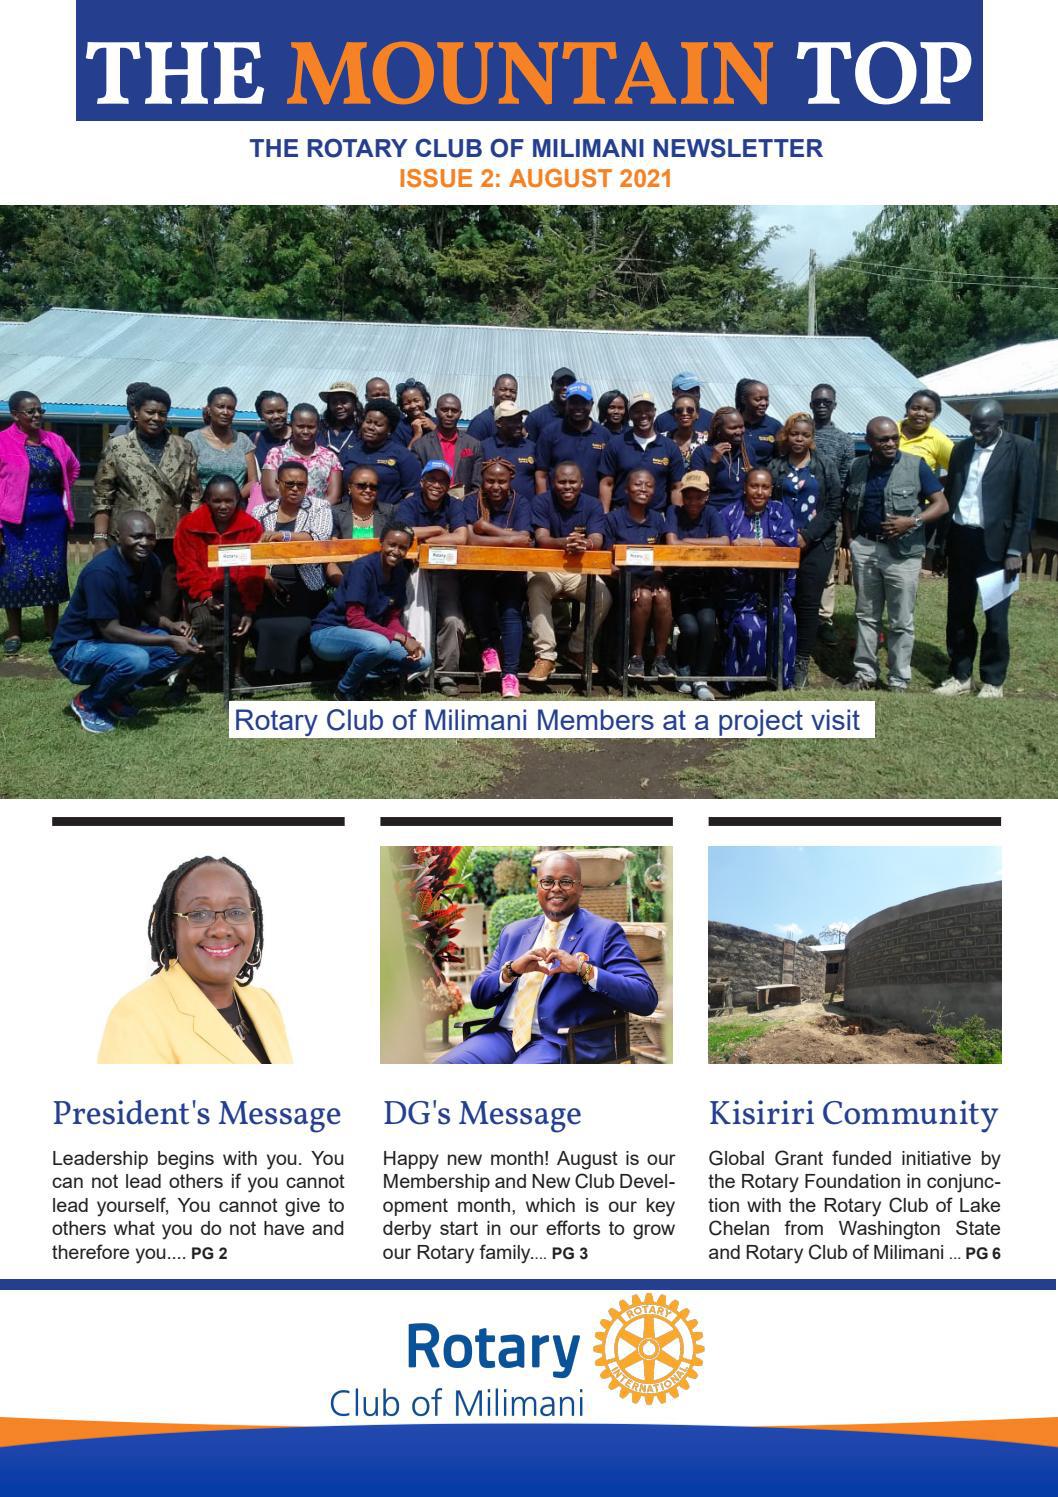 The Mountain Top (Rotary Club of Milimani Magazine August Issue 2)